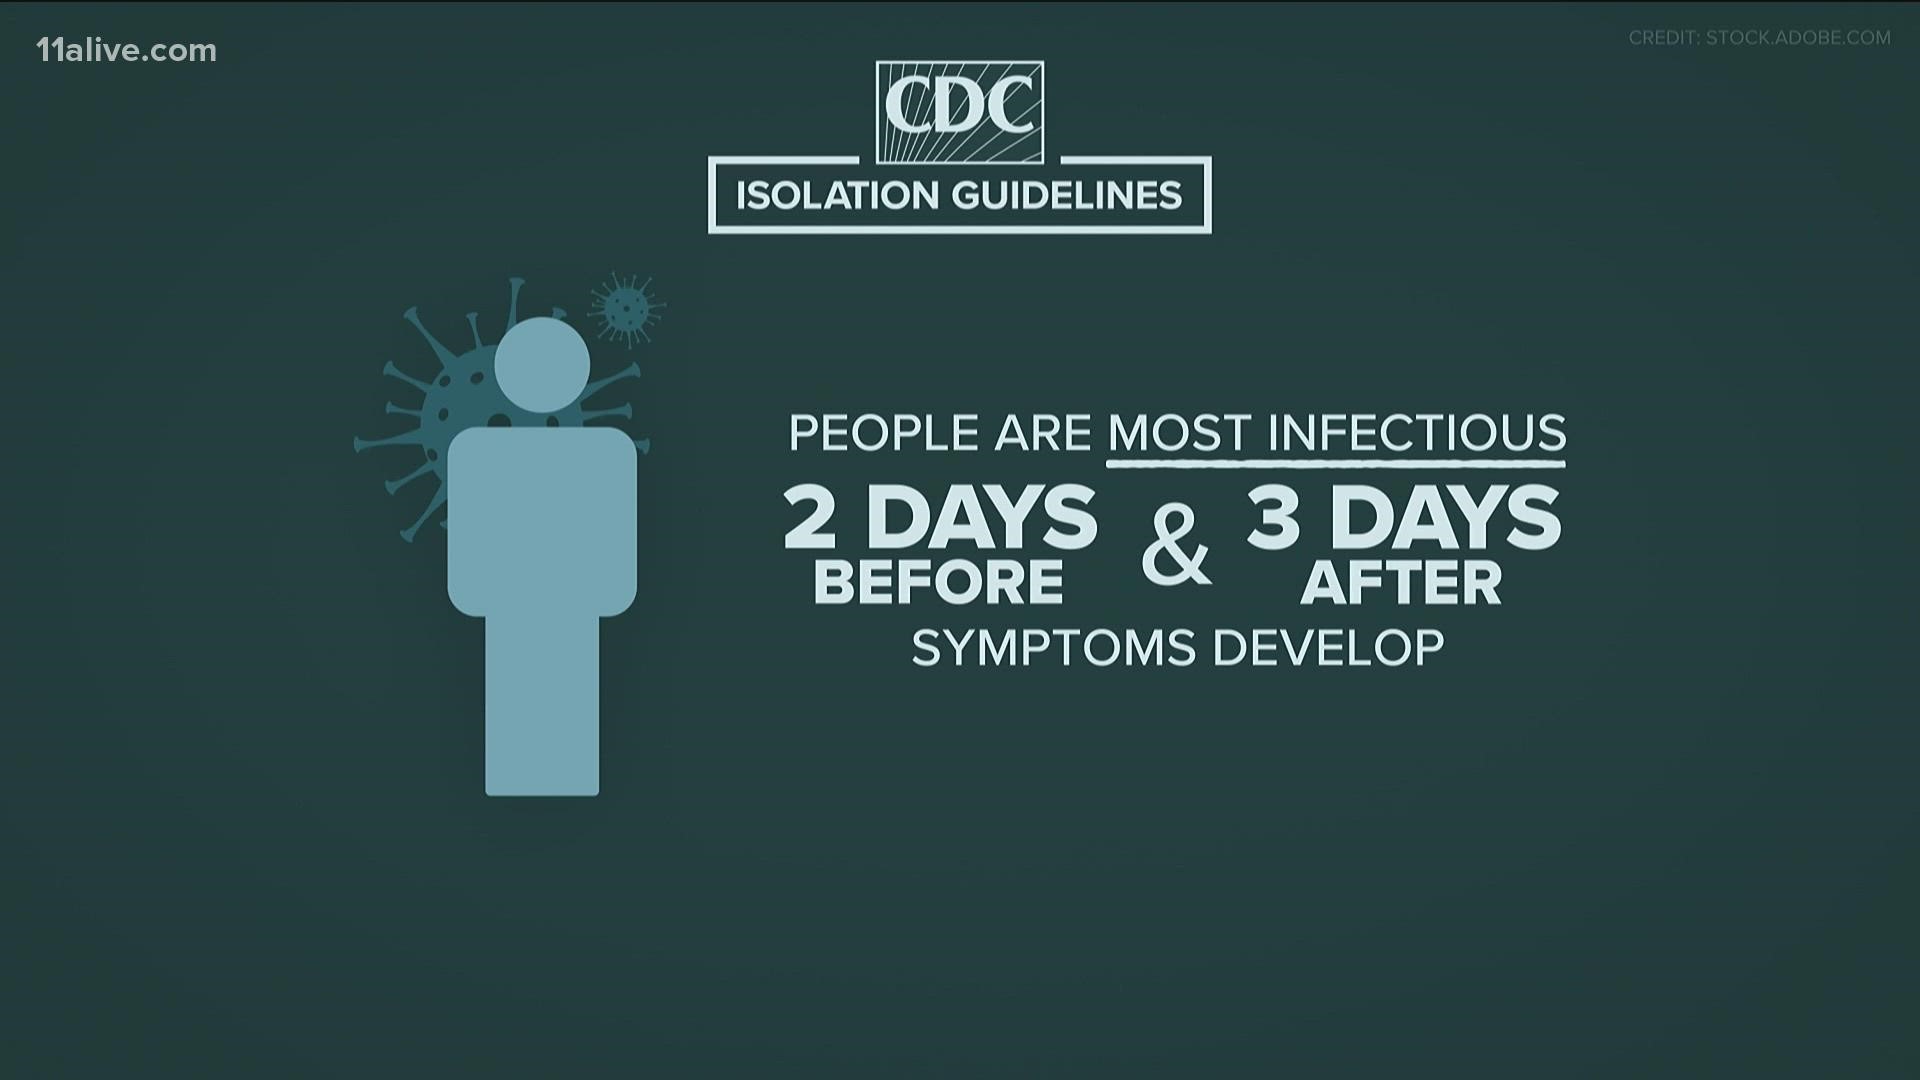 According to the new guidance, an infected person should isolate for 5 days -- not 10. If asymptomatic at that time, they can leave isolation while masked.